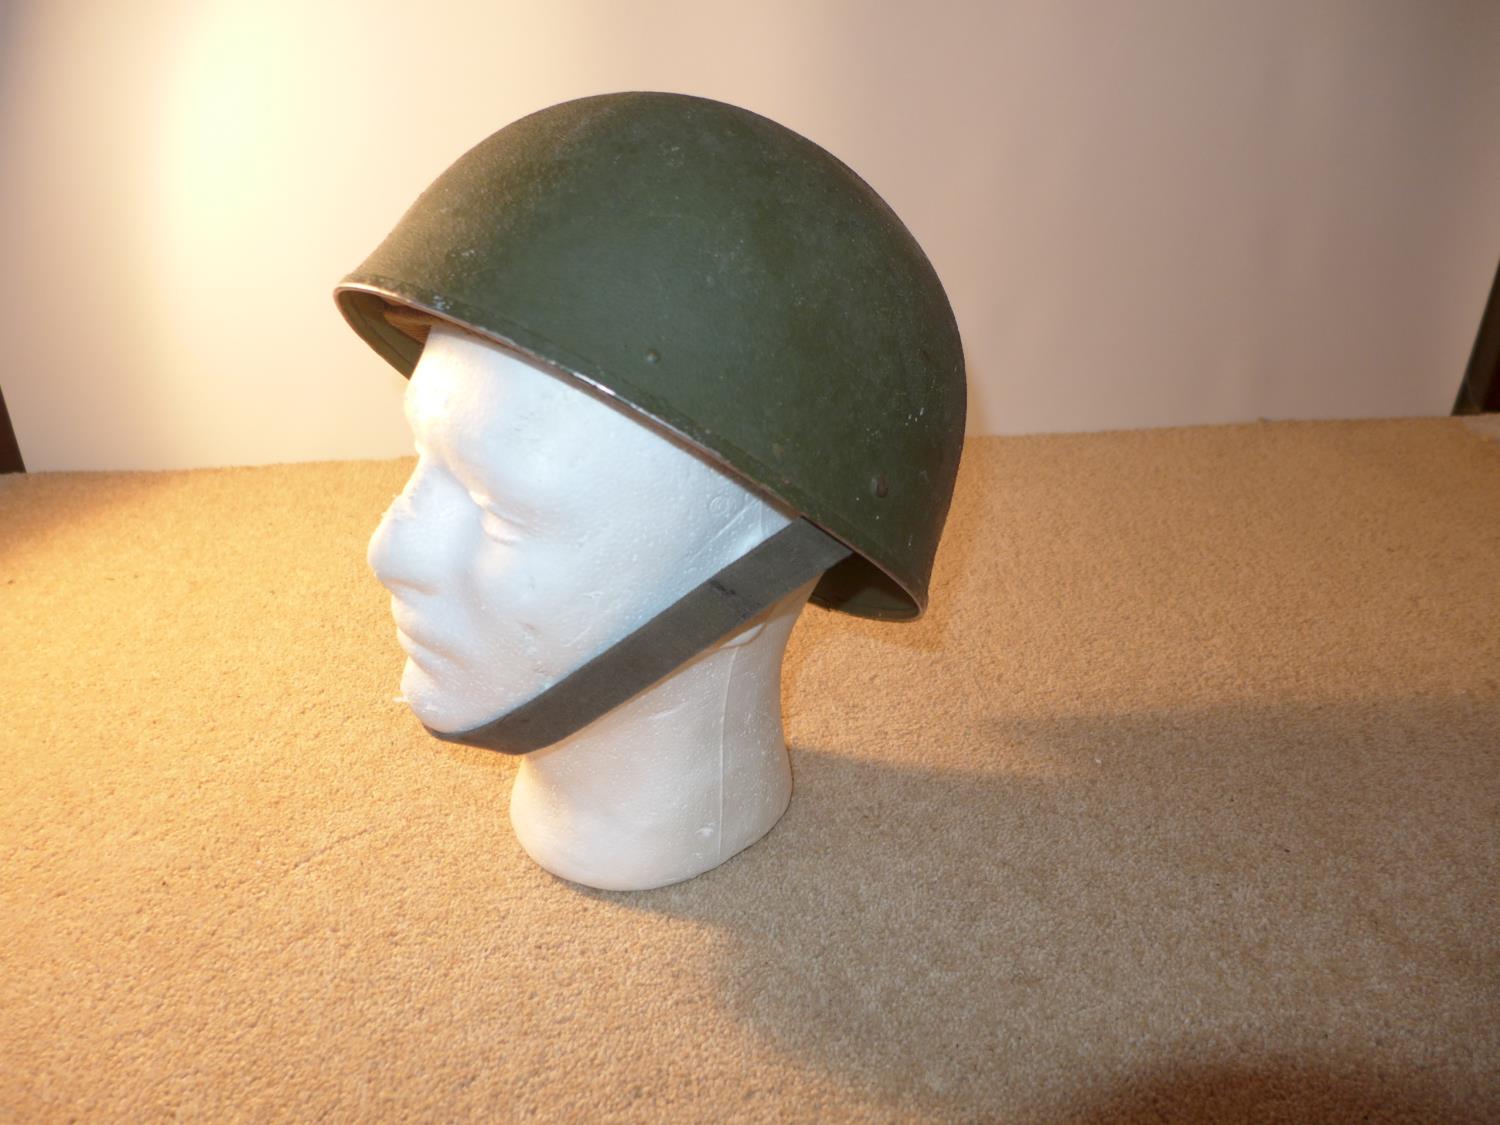 A BRITISH ARMY TANK CREW HELMET AND LINER